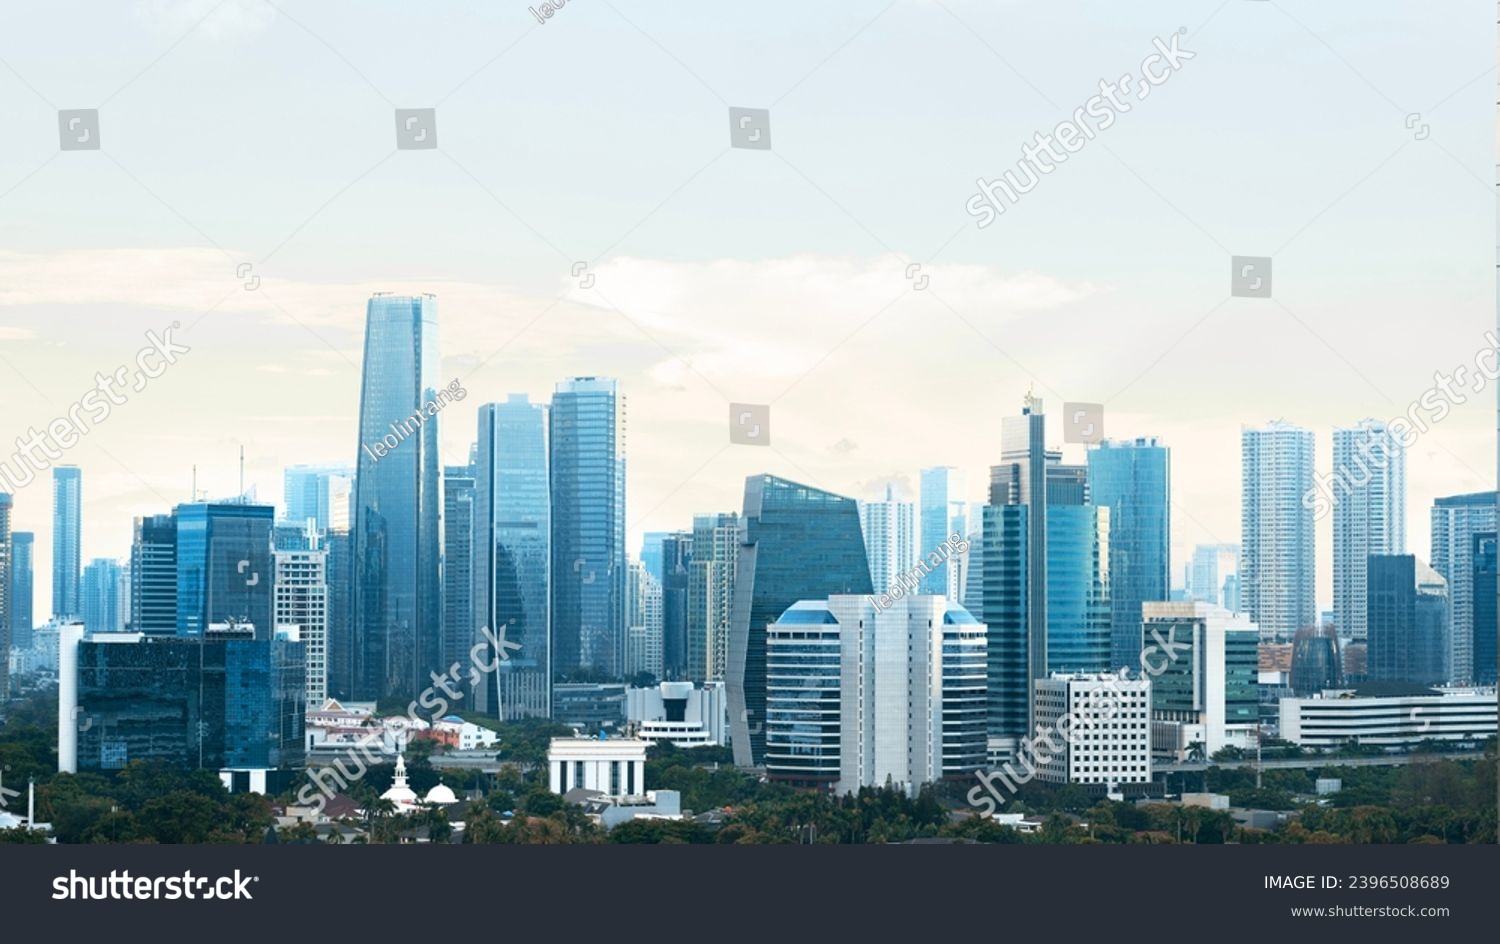 Panoramic Jakarta skyline with urban skyscrapers in the afternoon. Jakarta, Indonesia